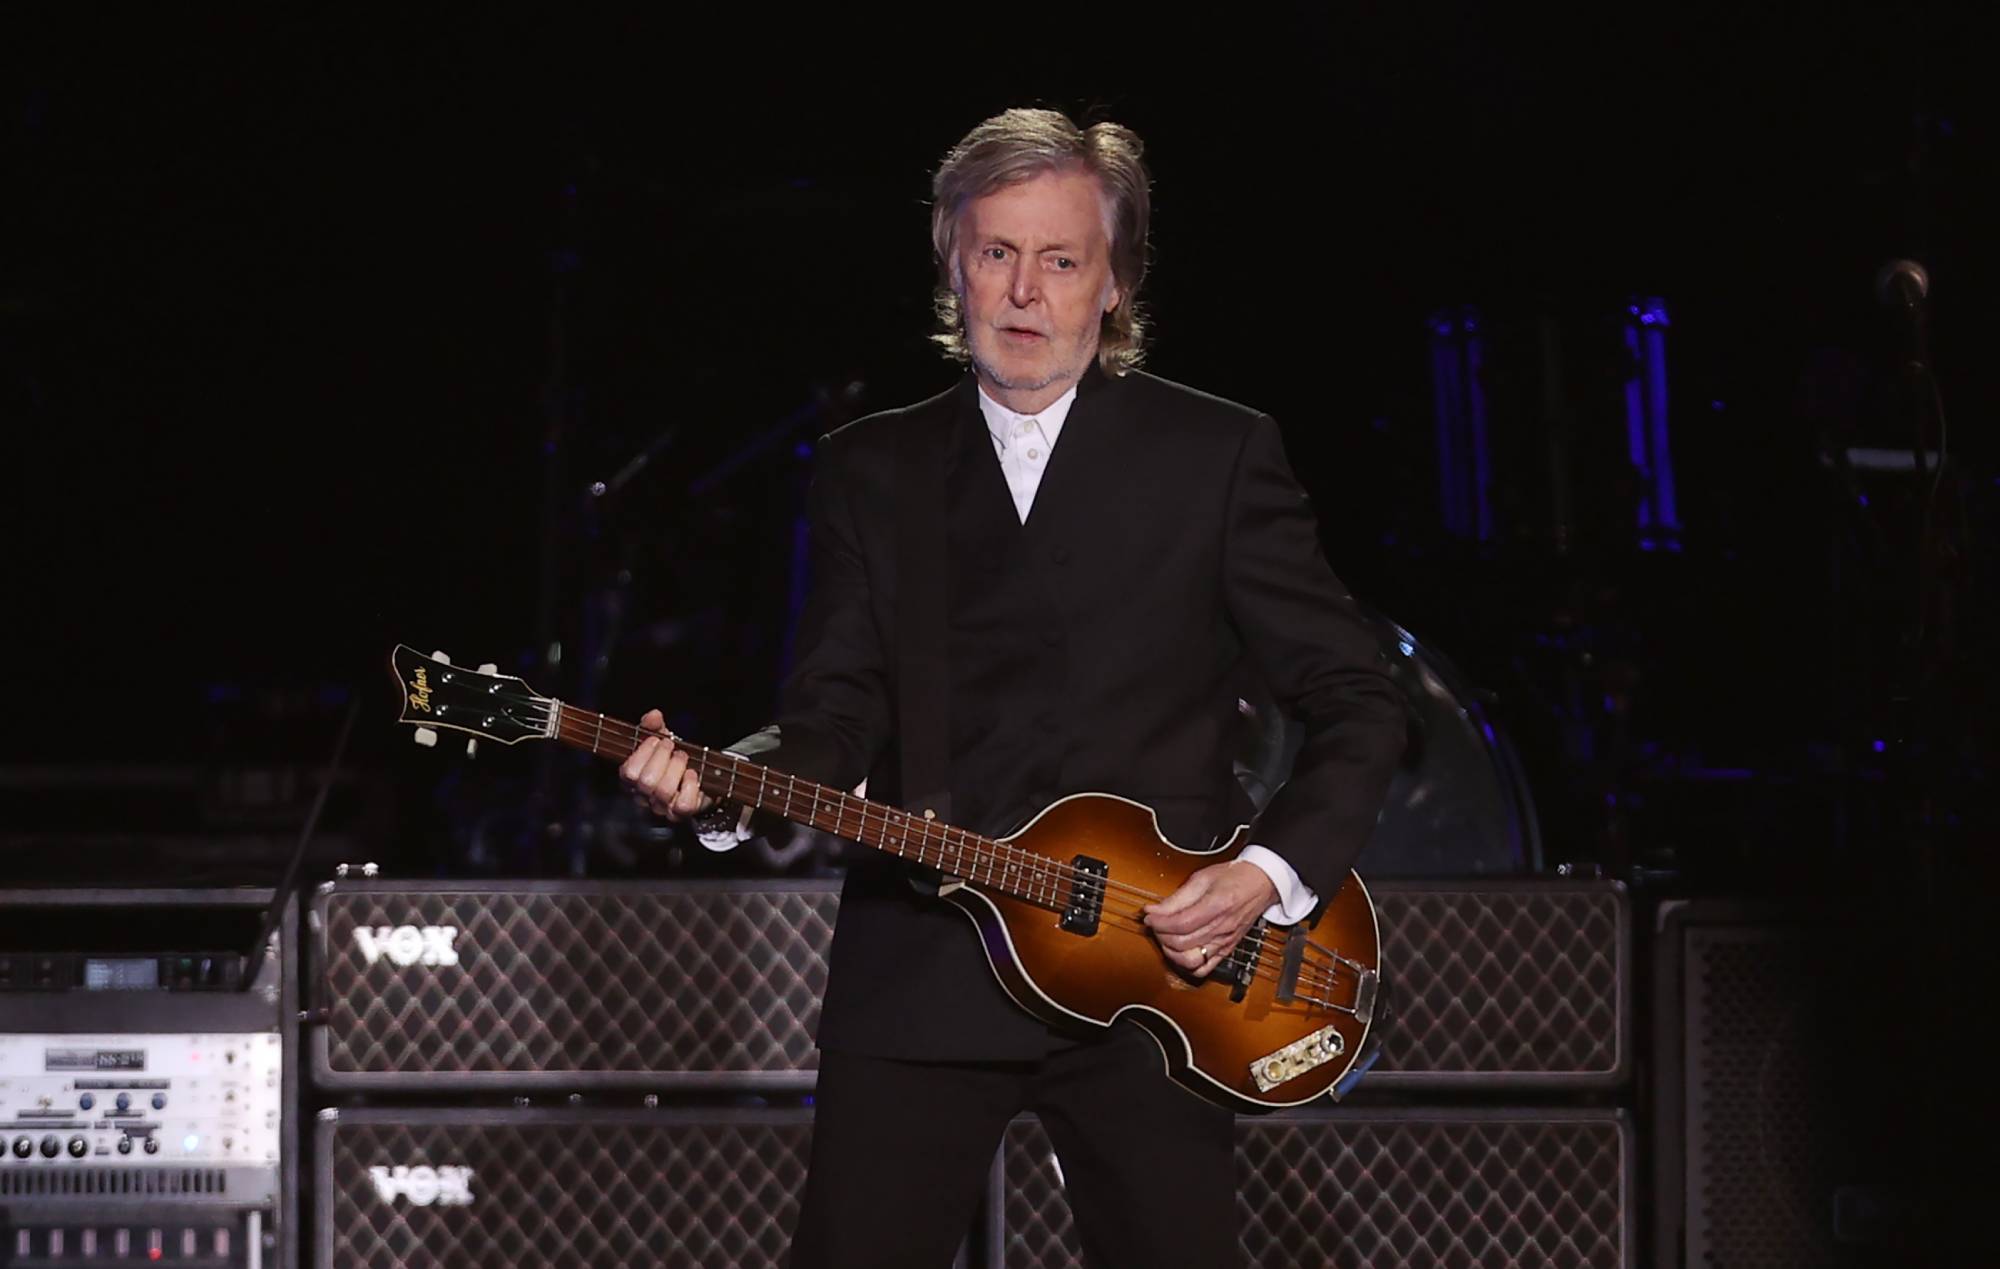 Paul McCartney says deaths of John Lennon and George Harrison still a “bitter pill to swallow”